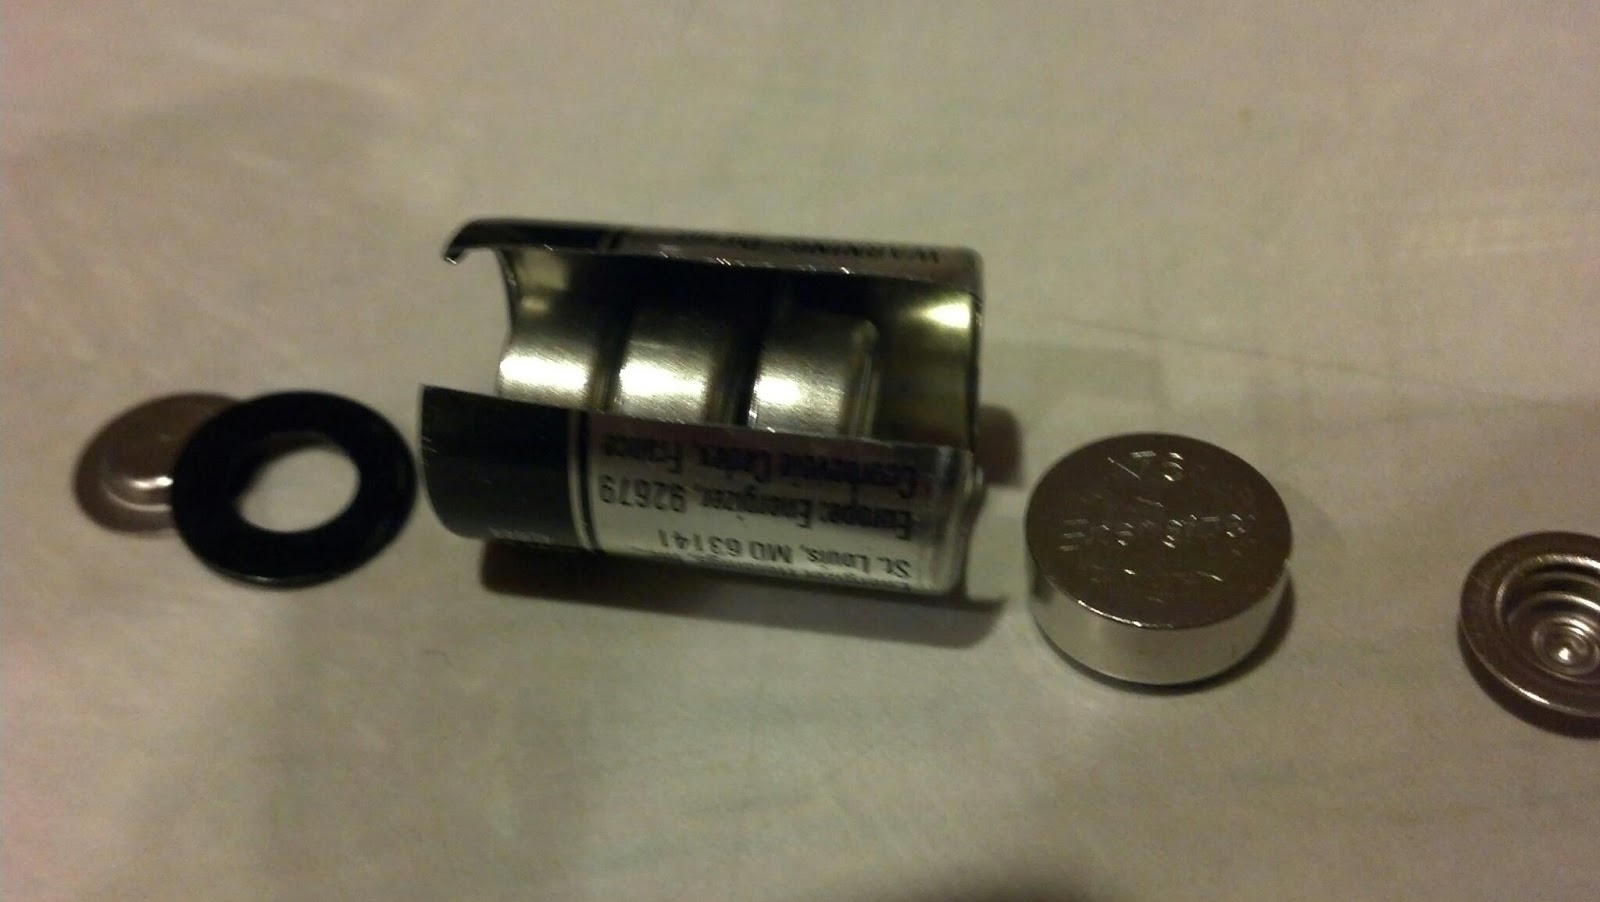 Stupid Dingo: There are watch batteries inside AA batteries